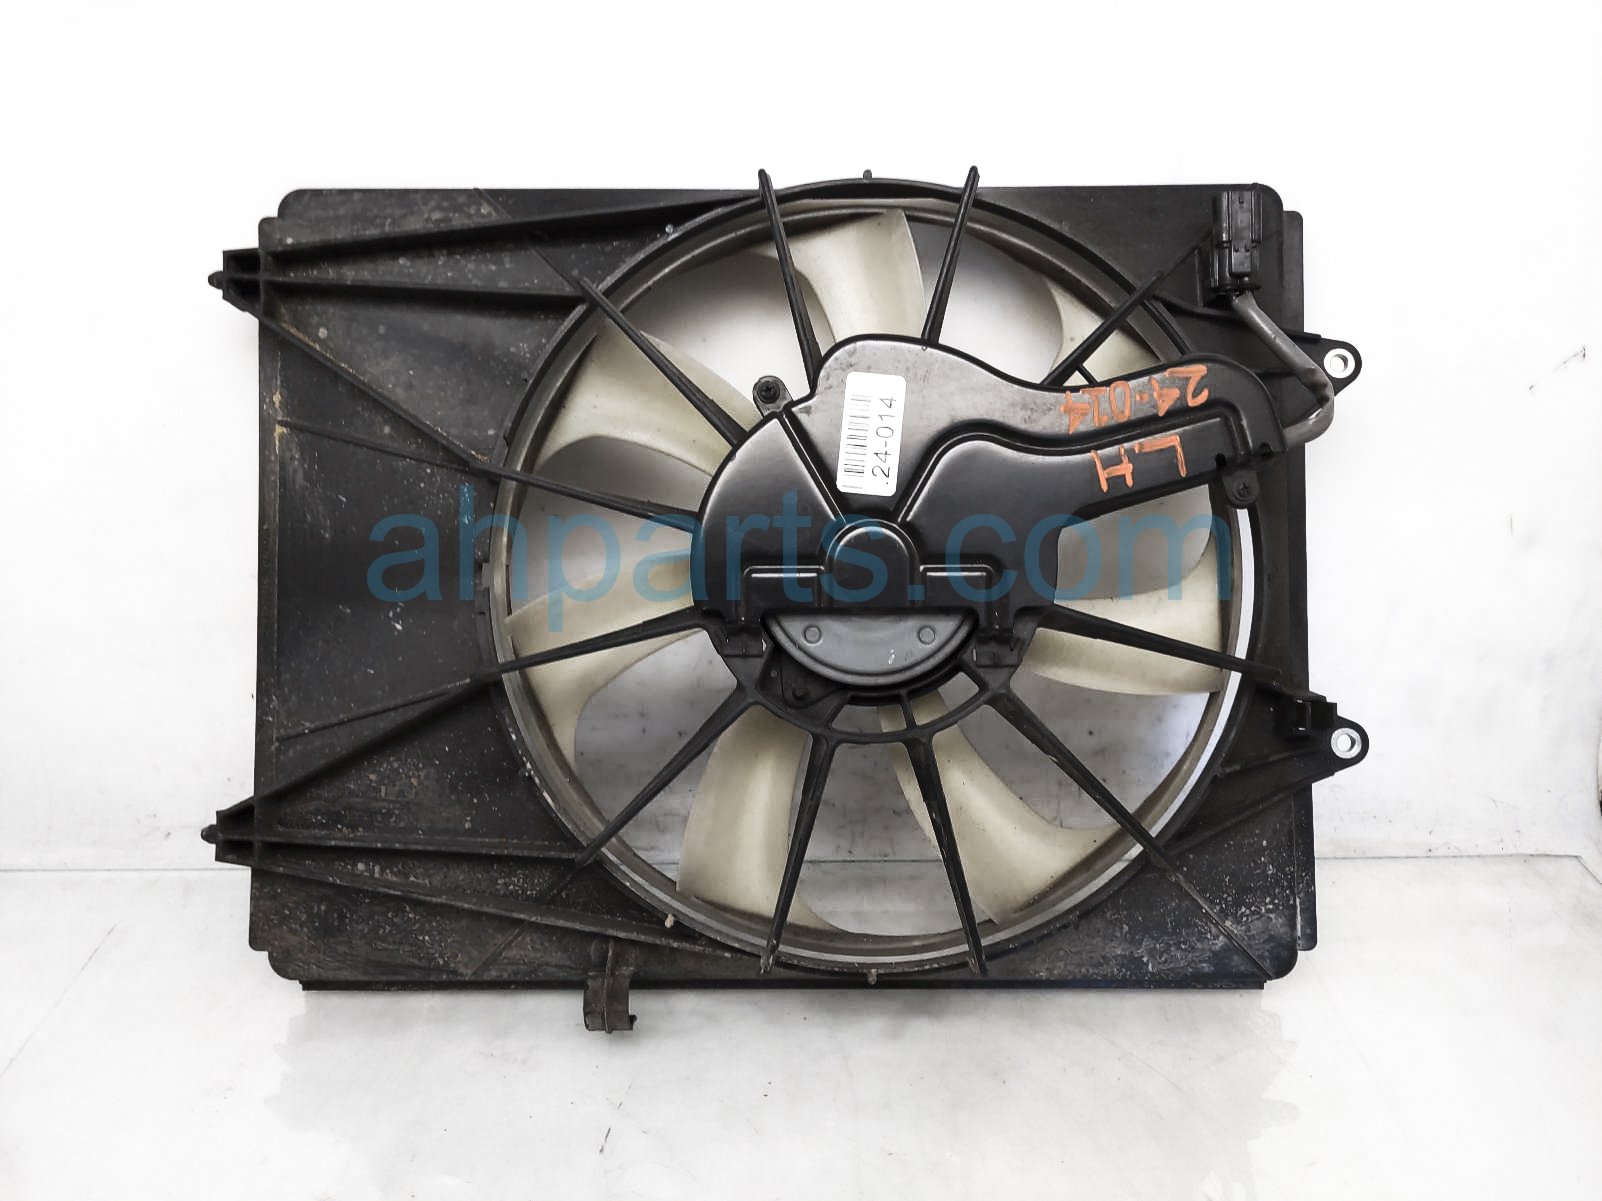 $125 Acura AC CONDENSOR FAN ASSEMBLY